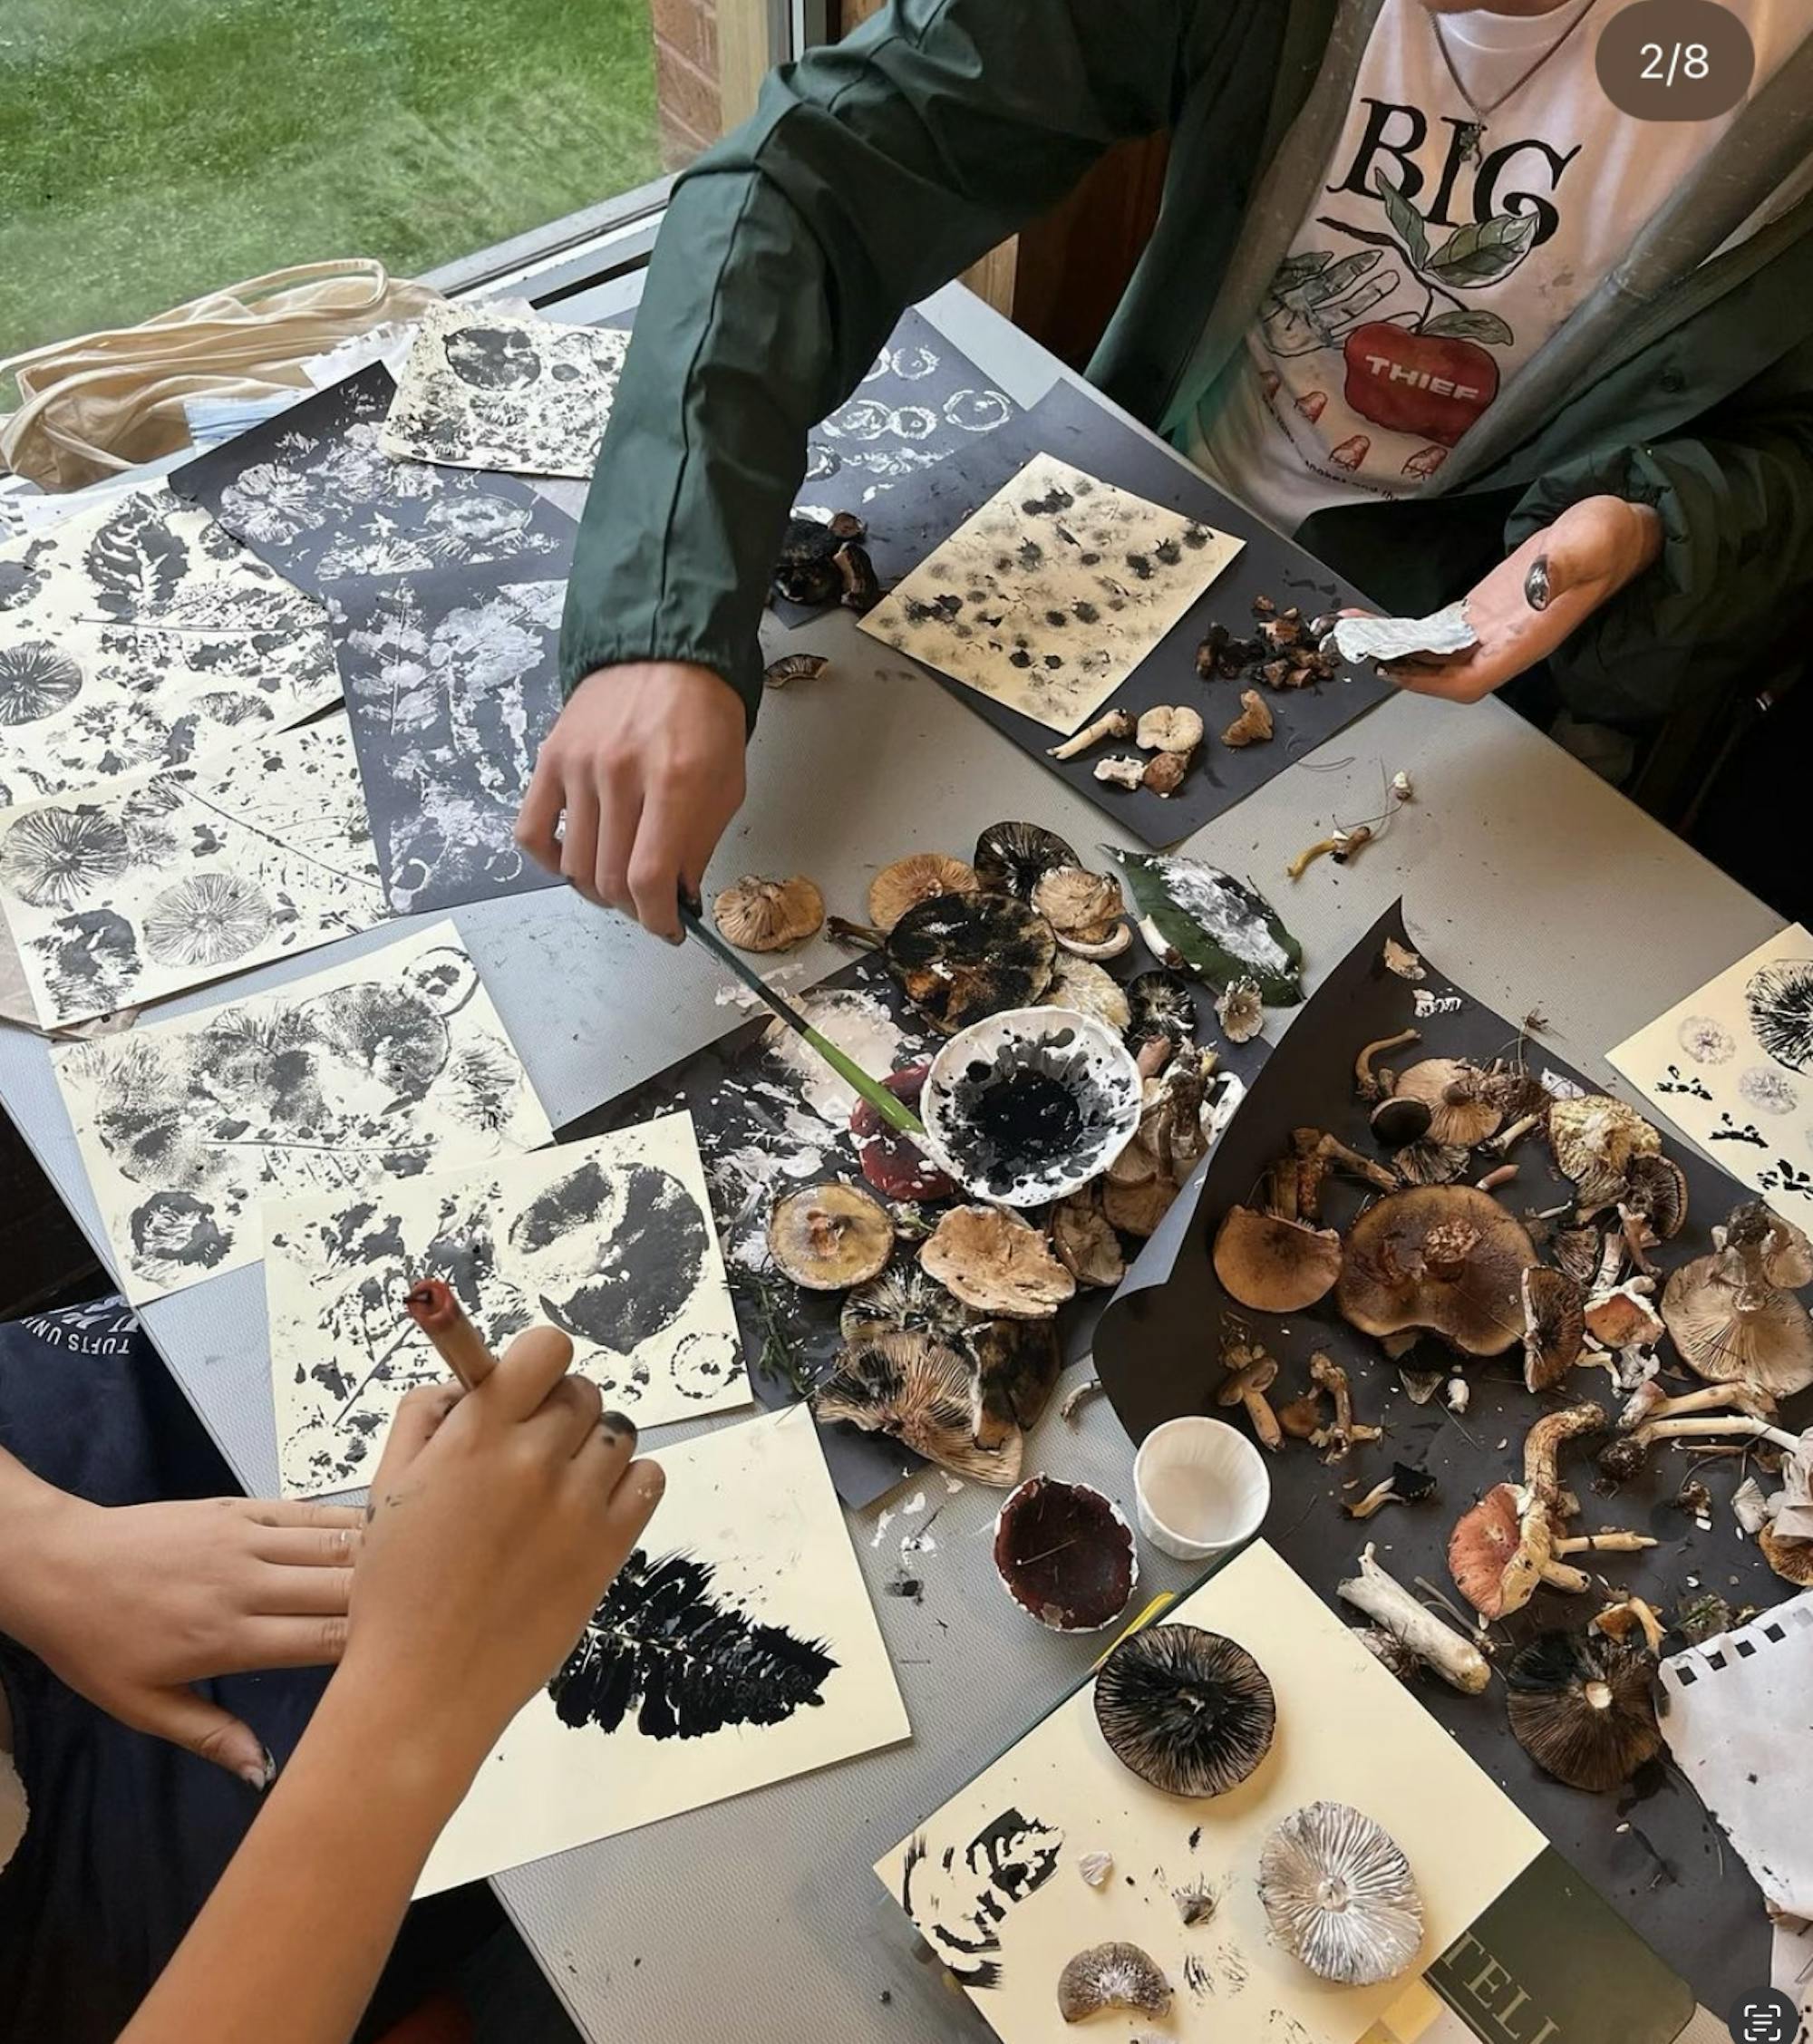 Eco-Art Club members are pictured making spore prints.